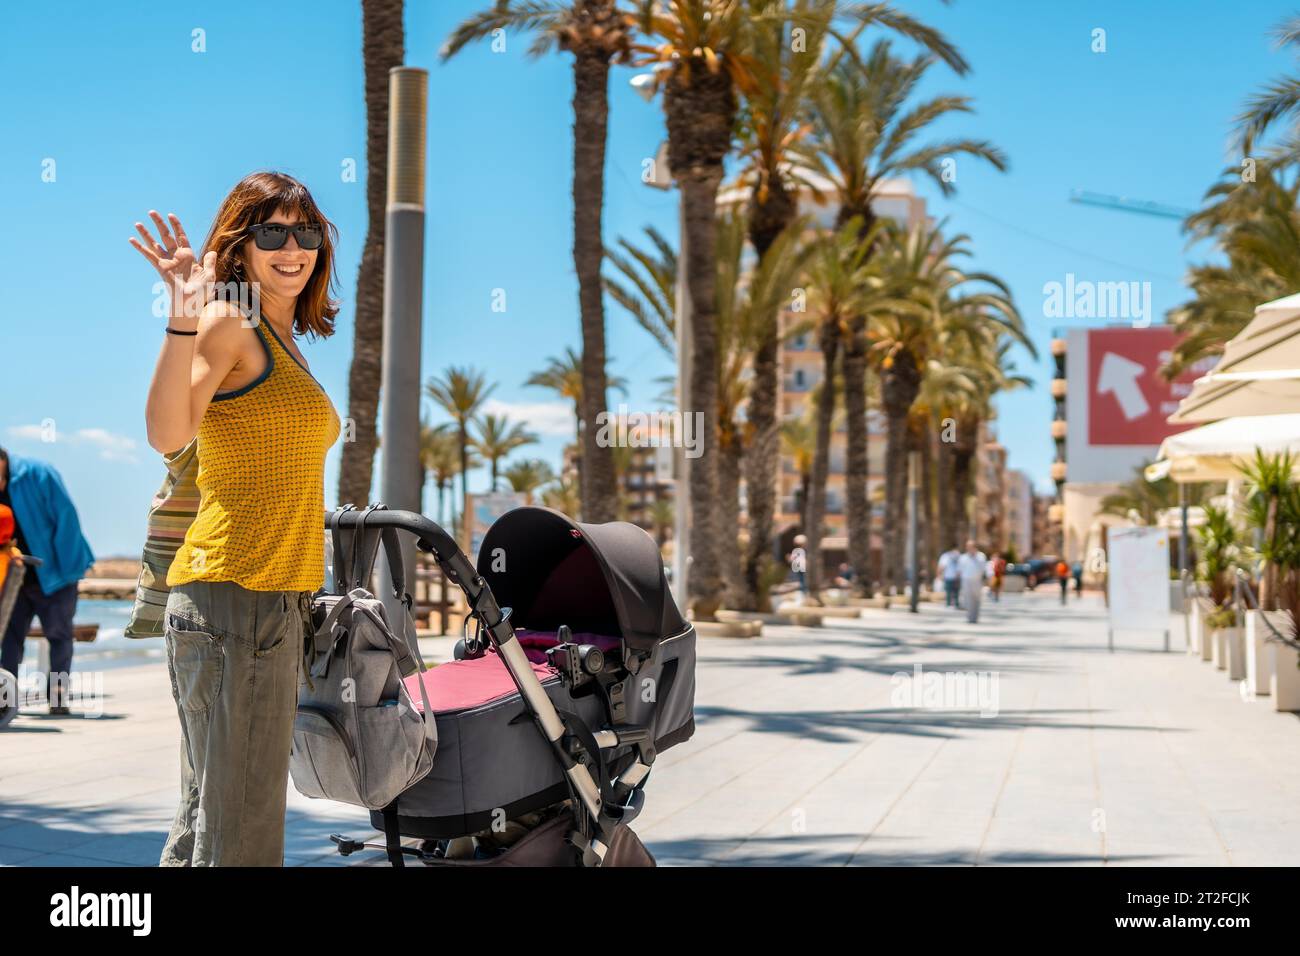 A young mother walking her baby in the car in the coastal city of Torrevieja, Alicante, Valencian Community. Spain, Mediterranean Sea Stock Photo